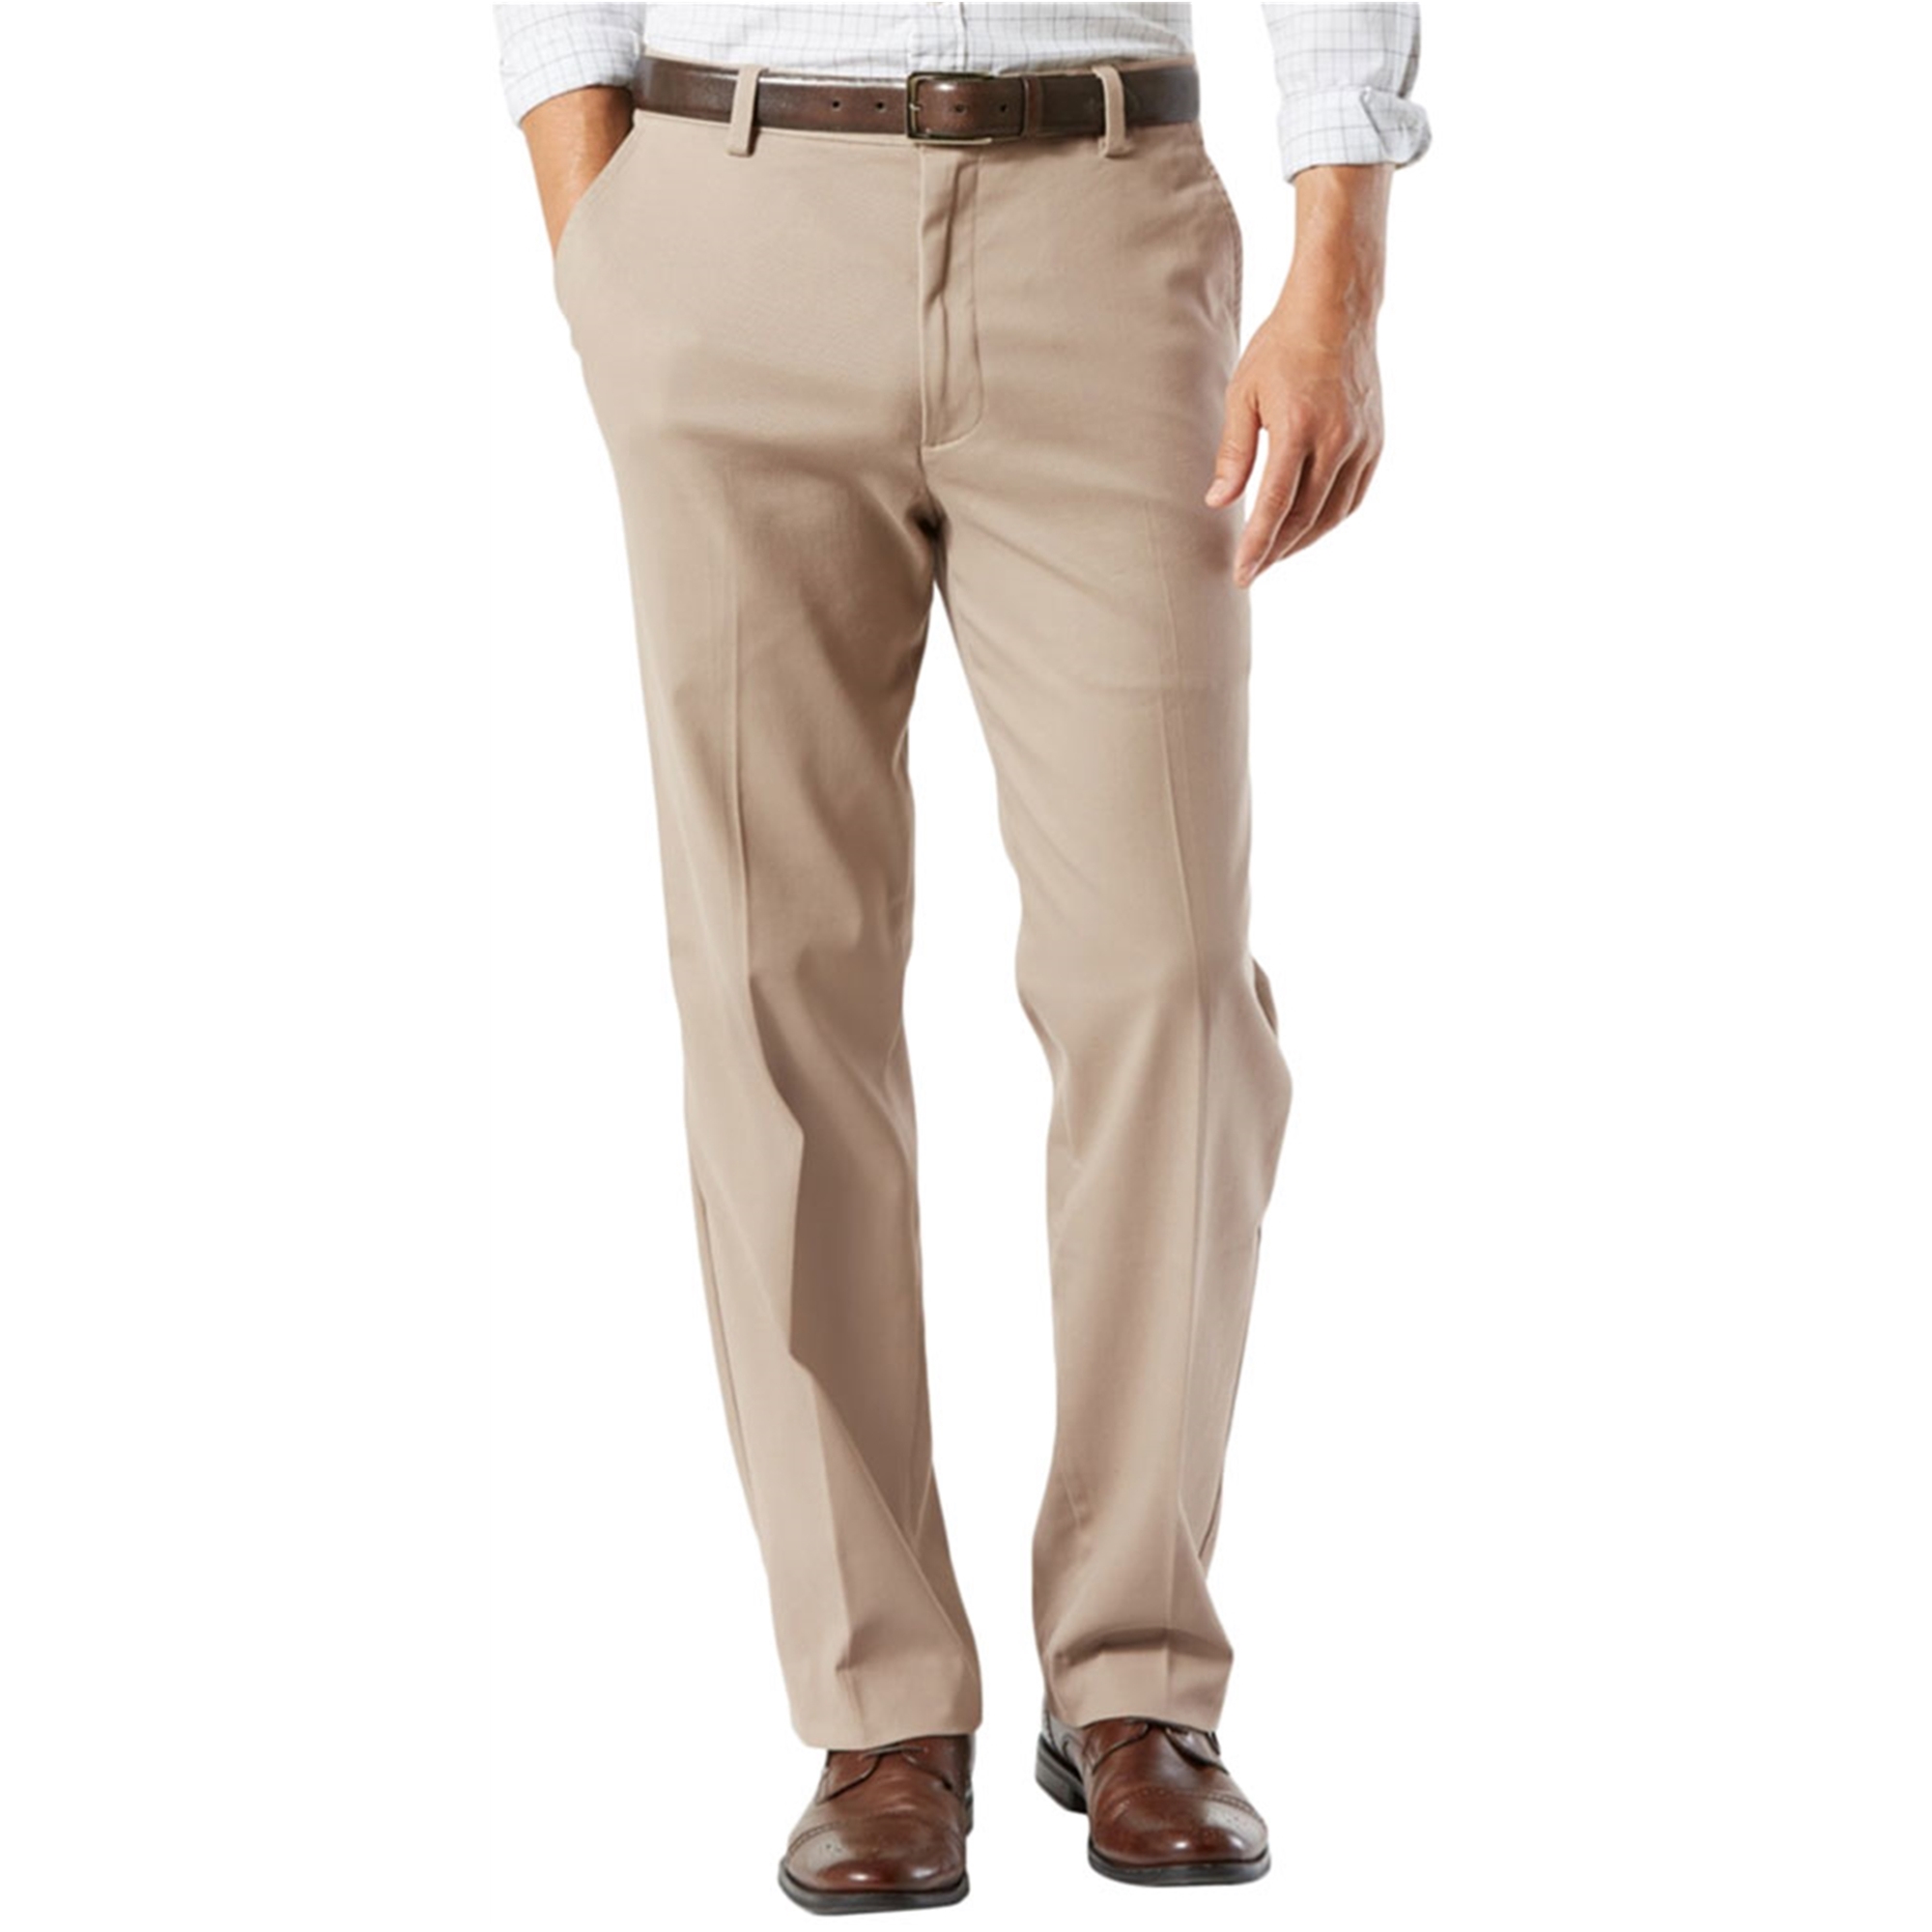 Dockers Mens Khakis Casual Trousers | Mens Apparel | Free Shipping on ...